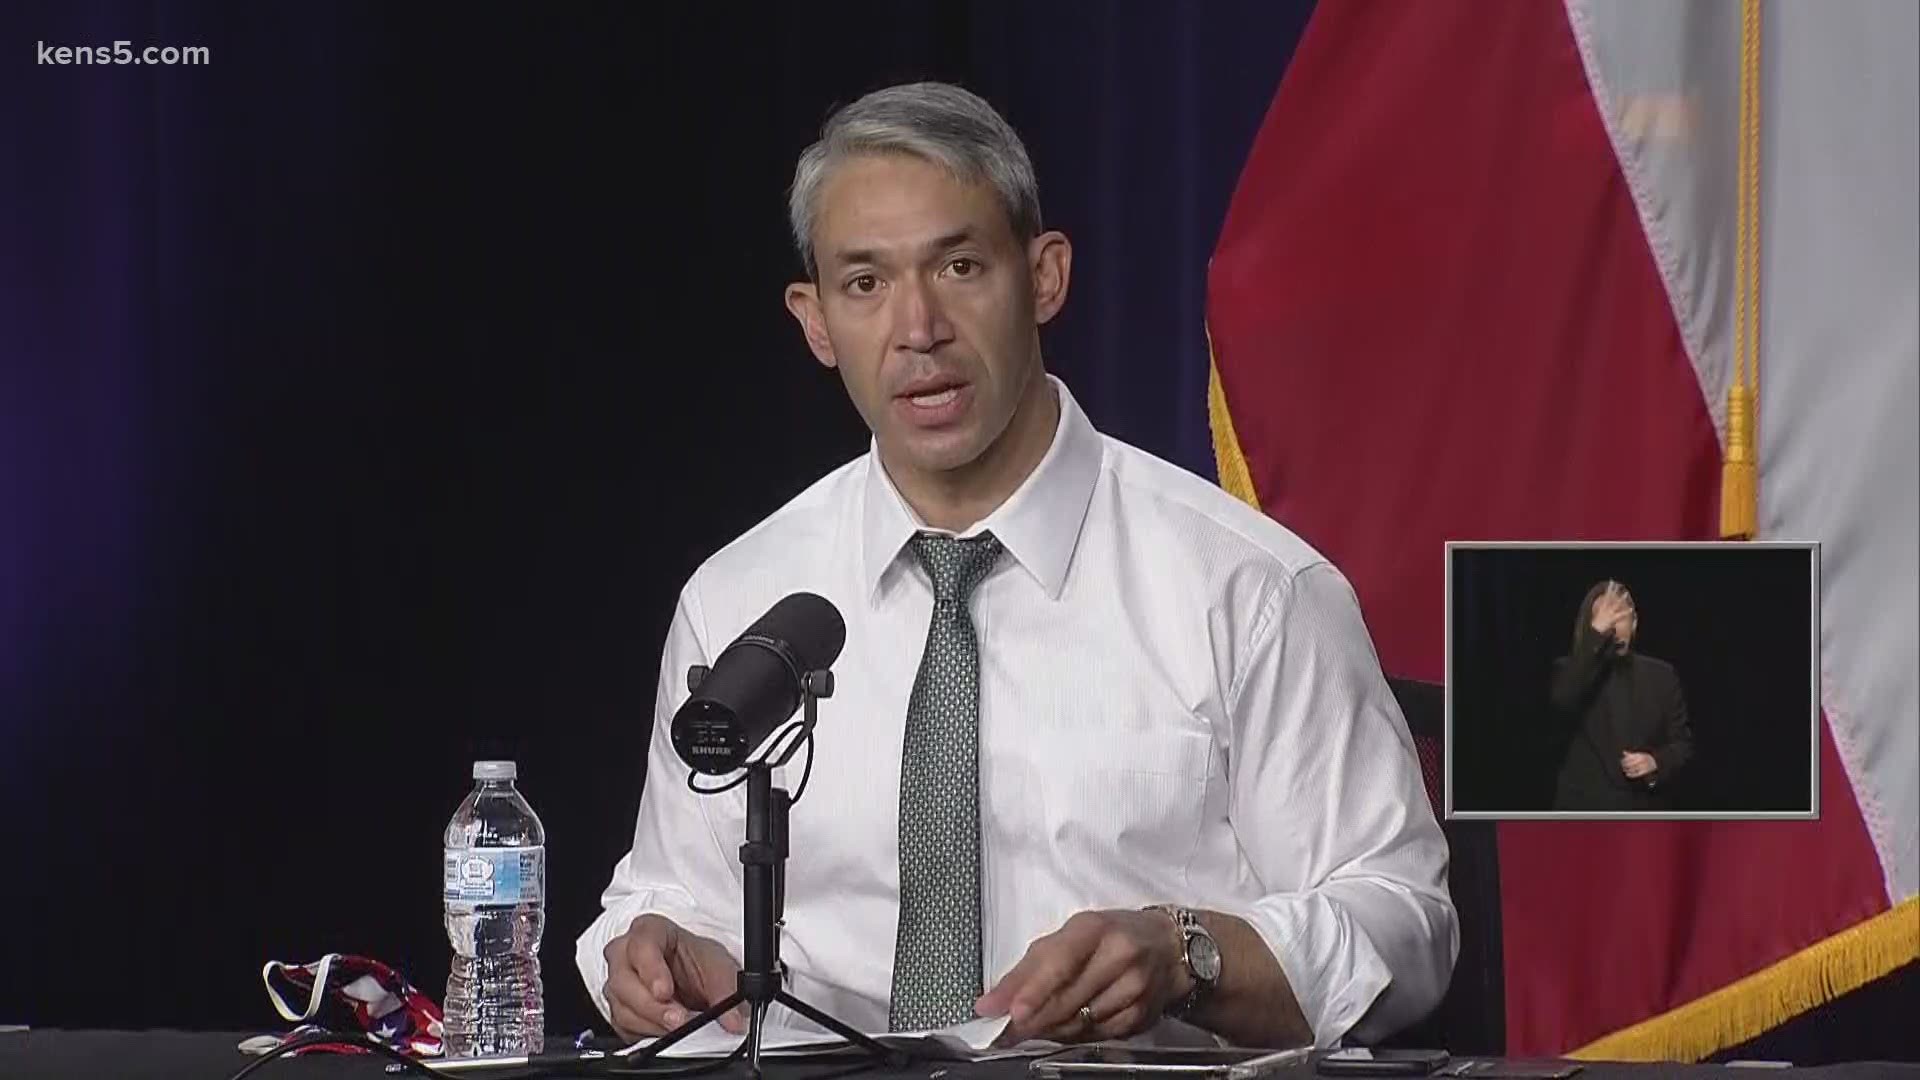 Mayor Ron Nirenberg reported 136 new cases, bringing the total since the beginning of the pandemic to 41,274. There were 10 new deaths, bringing the total to 380.